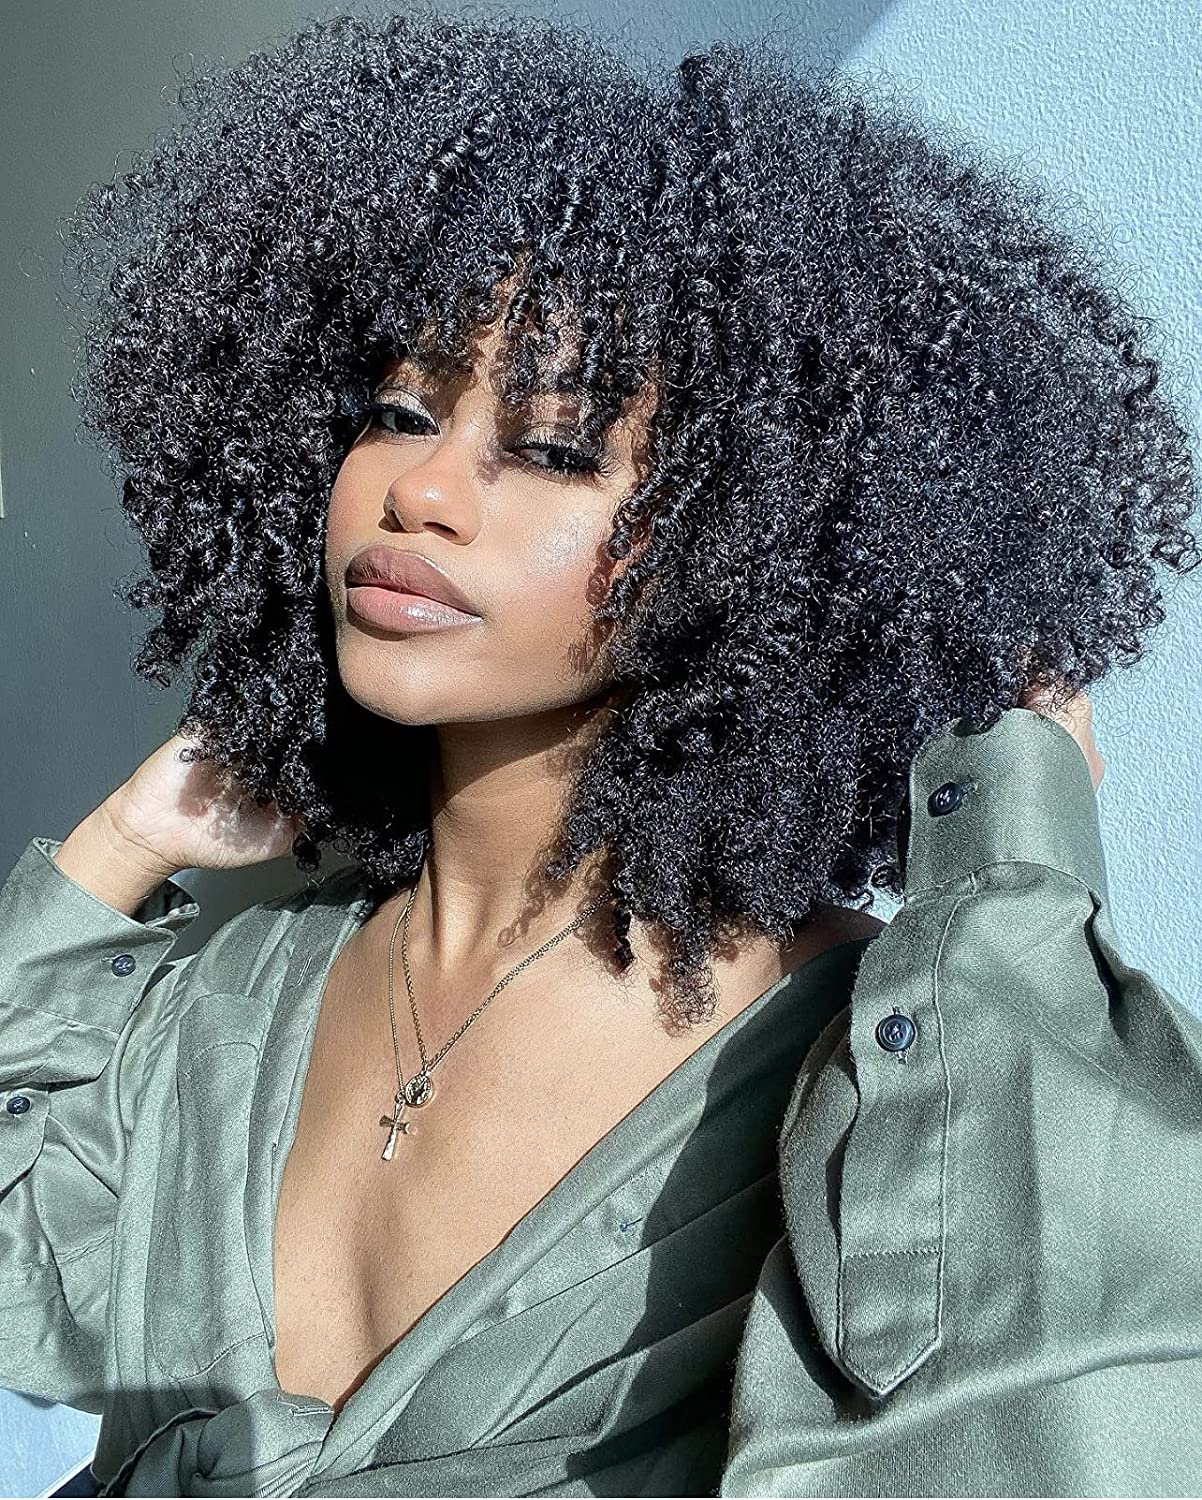 Beauty of Coily Hair: Your Guide to Embracing Your Curls